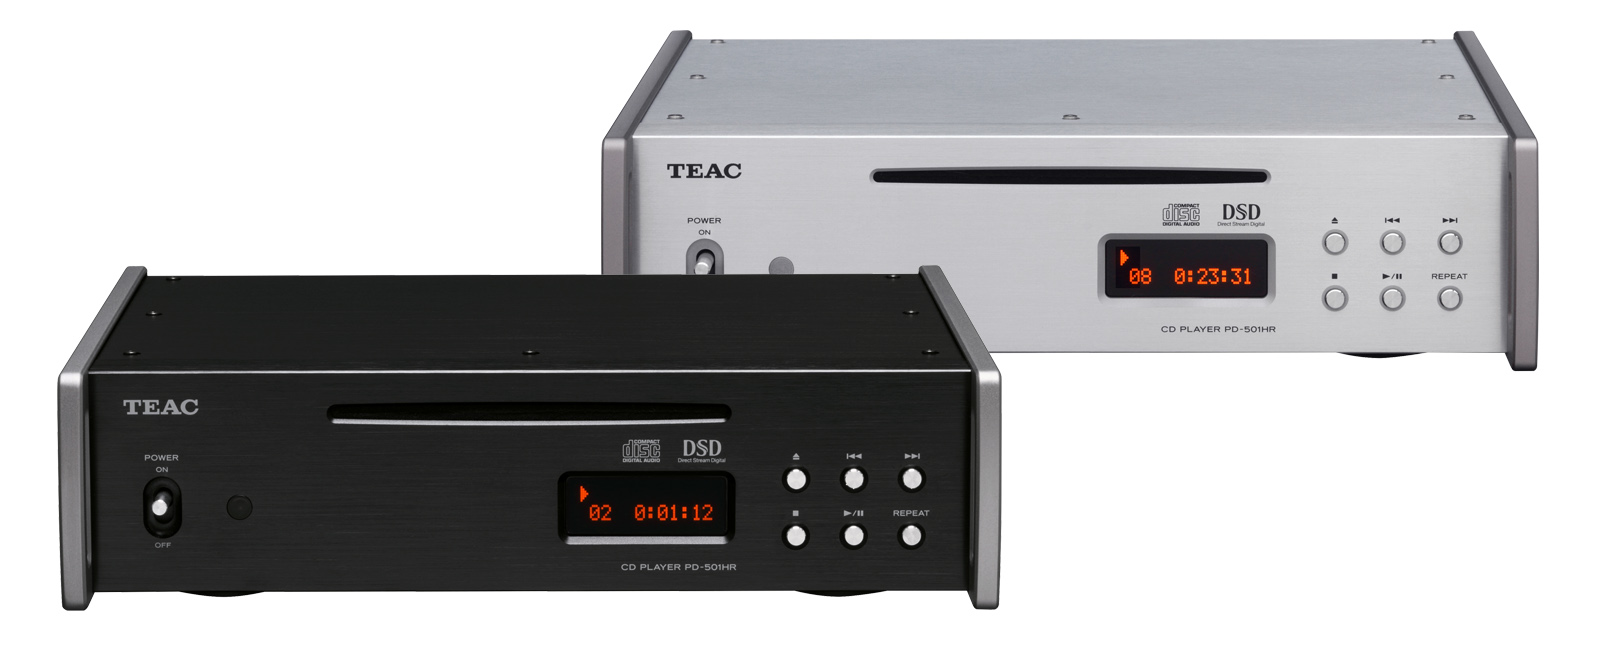 Teac PD-501HR CD Player in Black with High Resolution Audio 